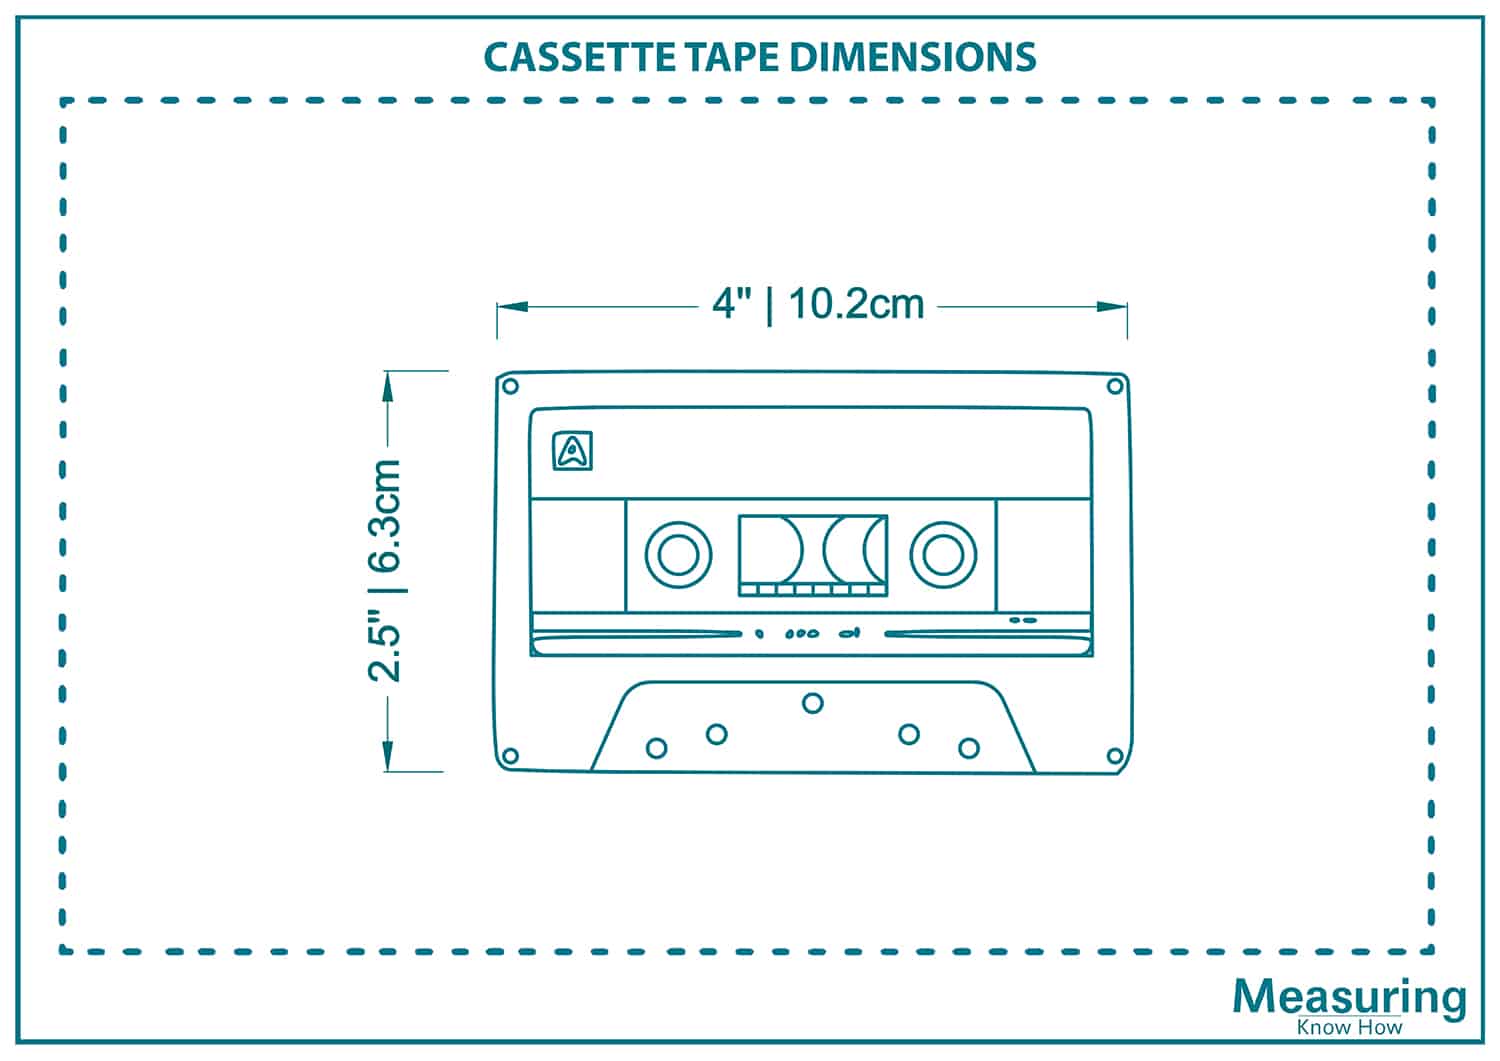 what-are-the-cassette-tape-dimensions-measuringknowhow